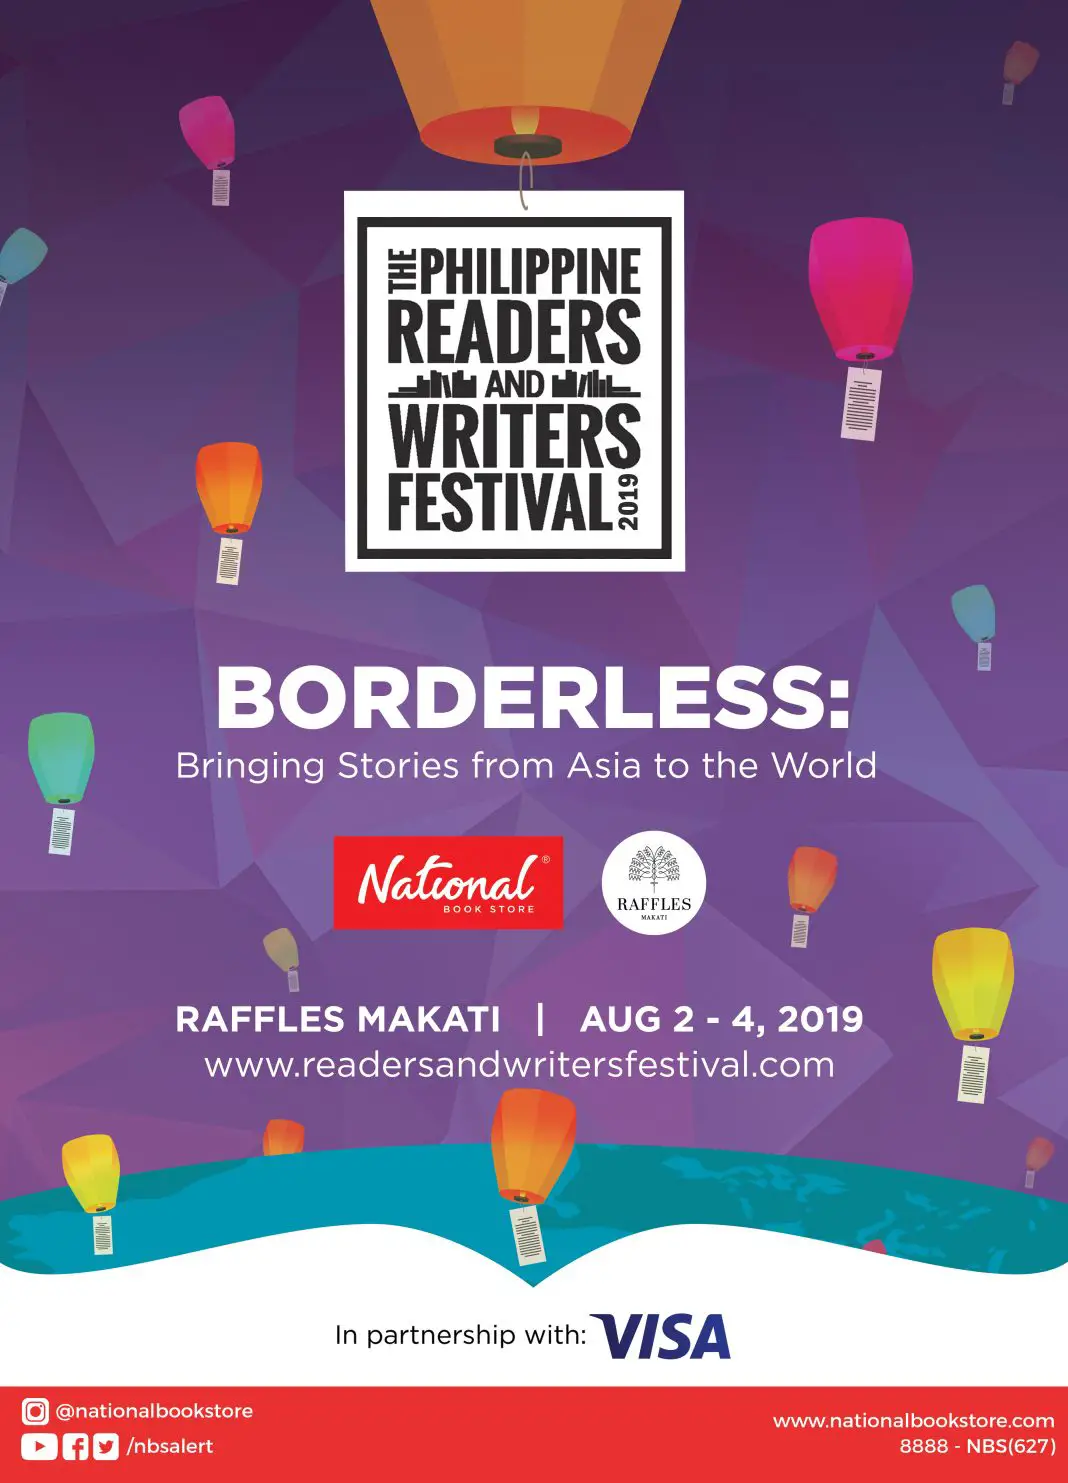 Meet award-winning authors at the Philippine Readers and Writers Festival